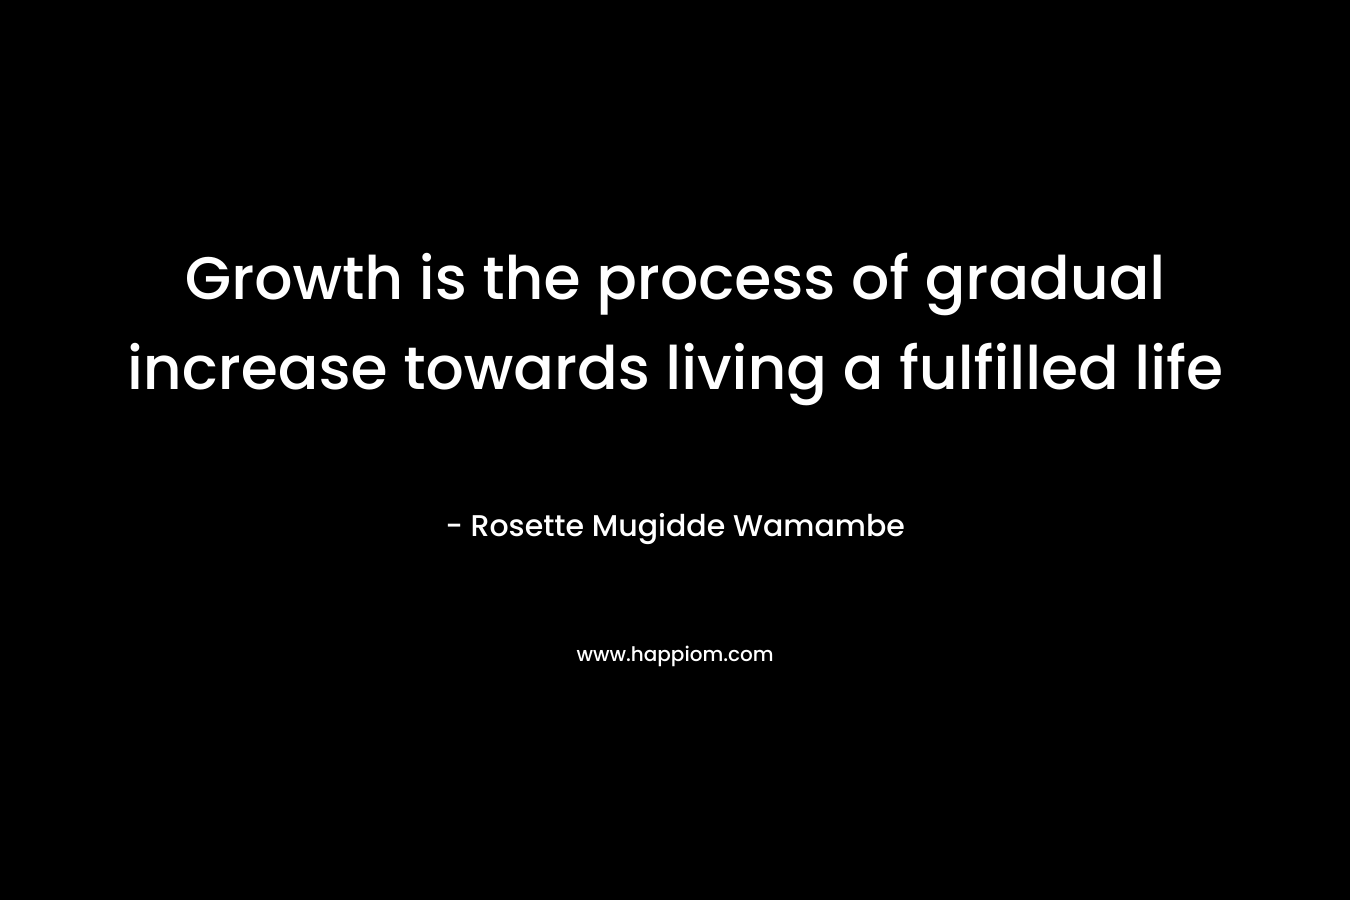 Growth is the process of gradual increase towards living a fulfilled life